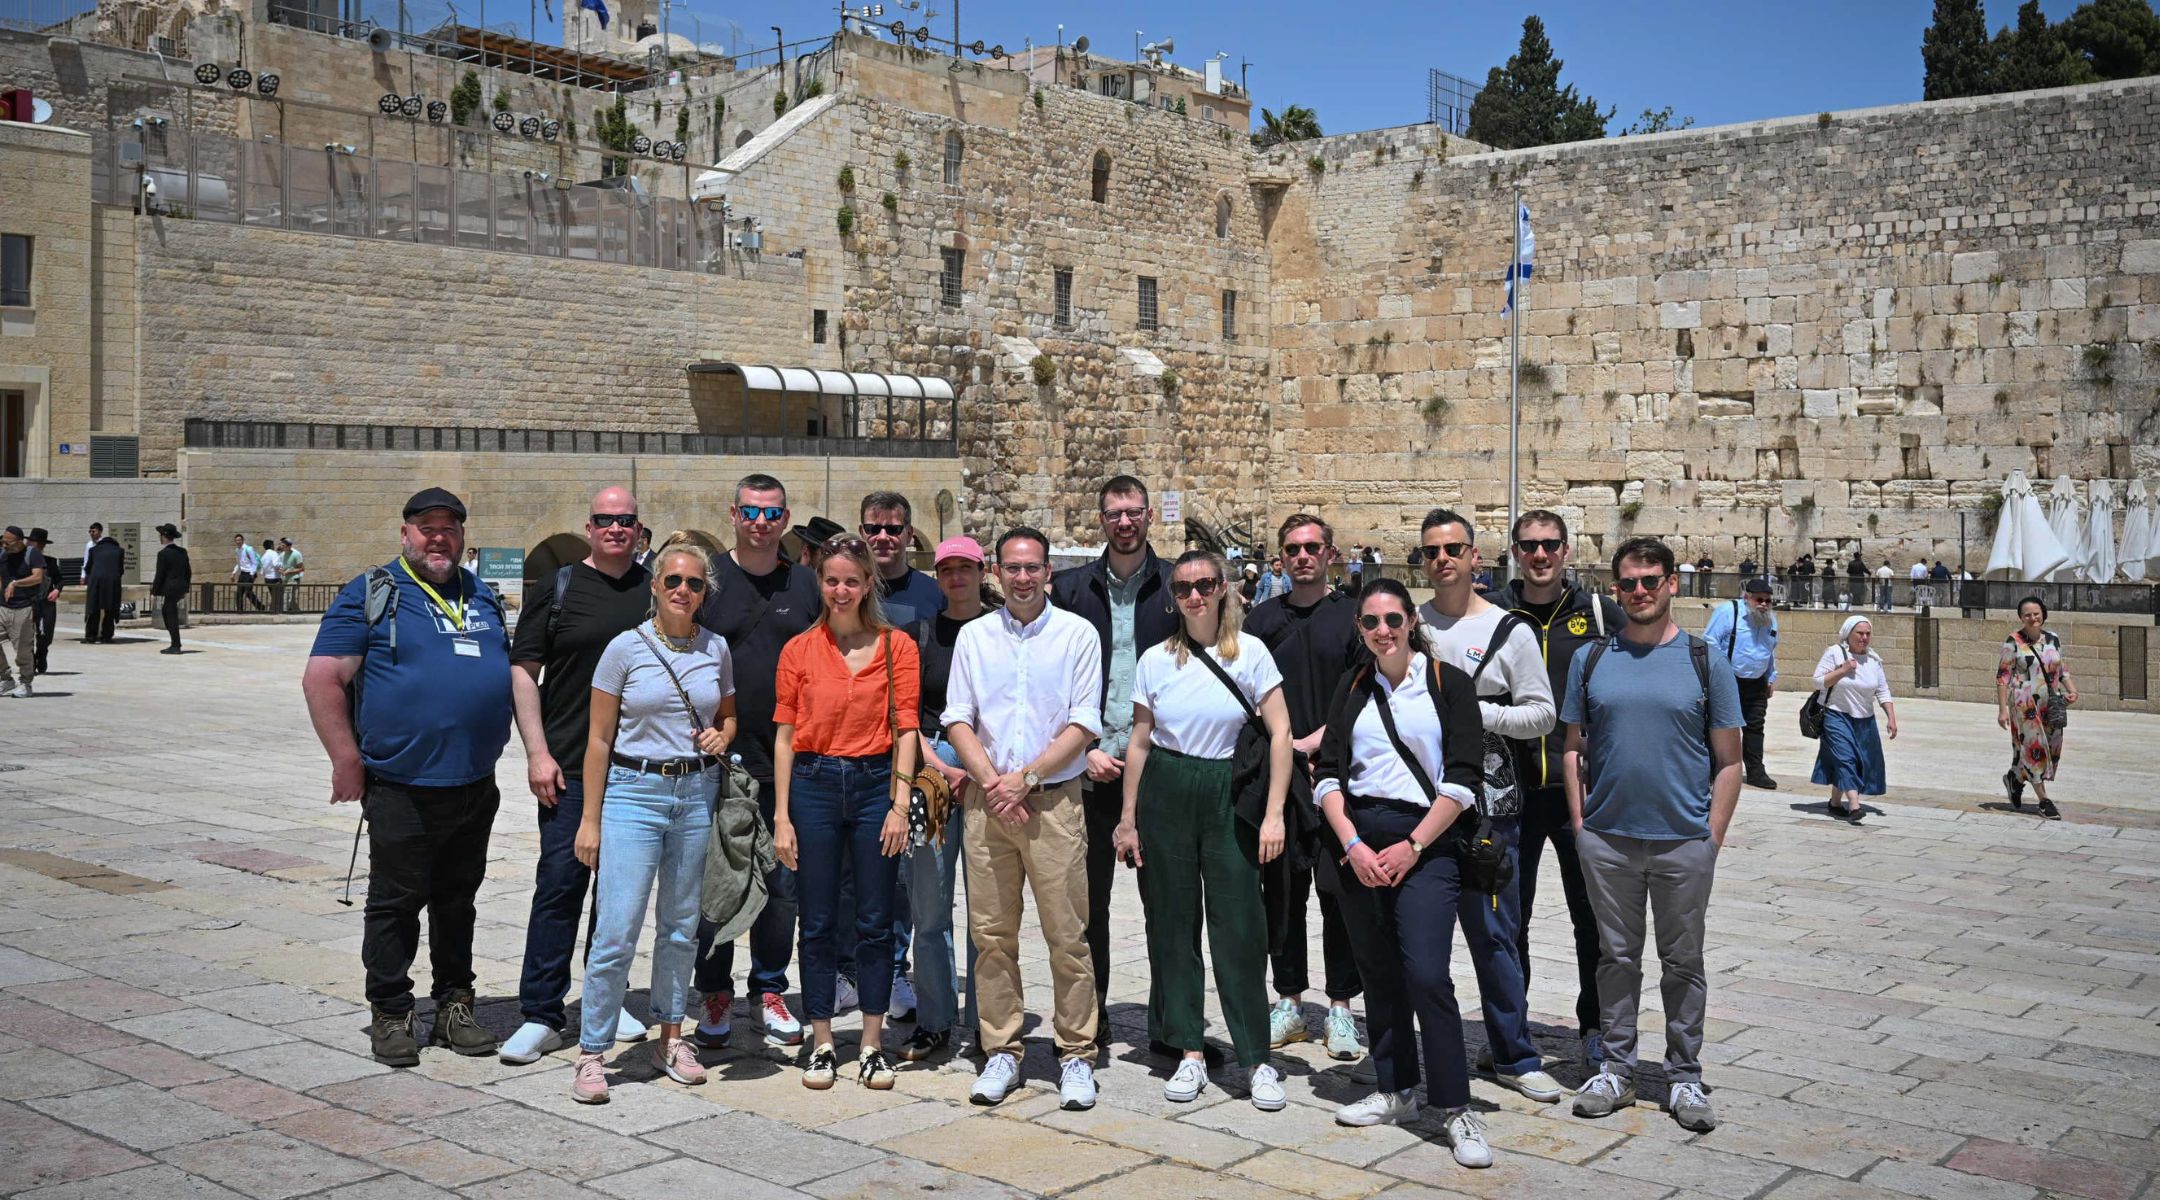 Group photo at the Western Wall